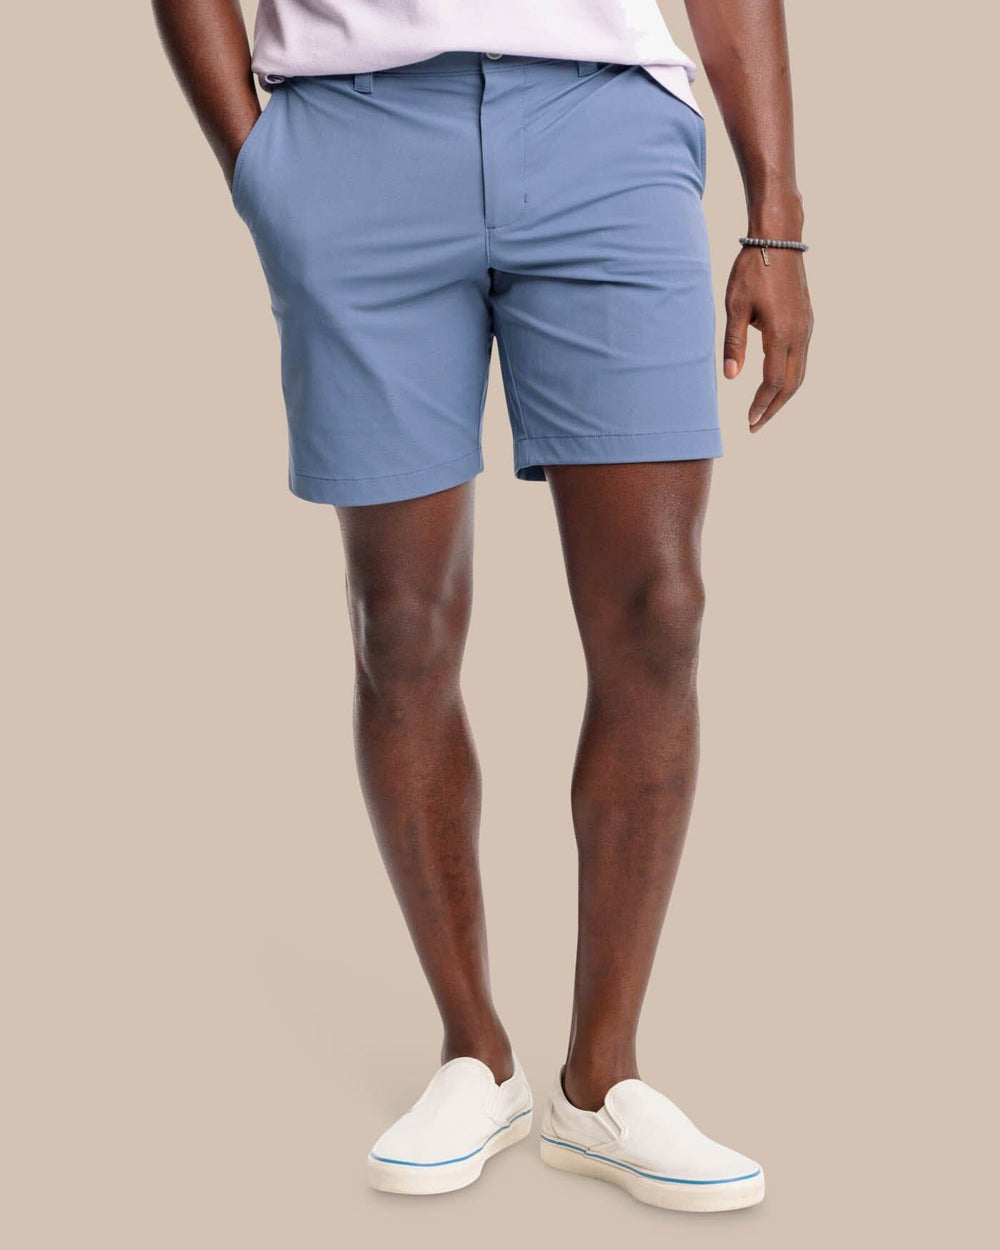 The front view of the Southern Tide brrr die performance short 1 by Southern Tide - Dark Seas